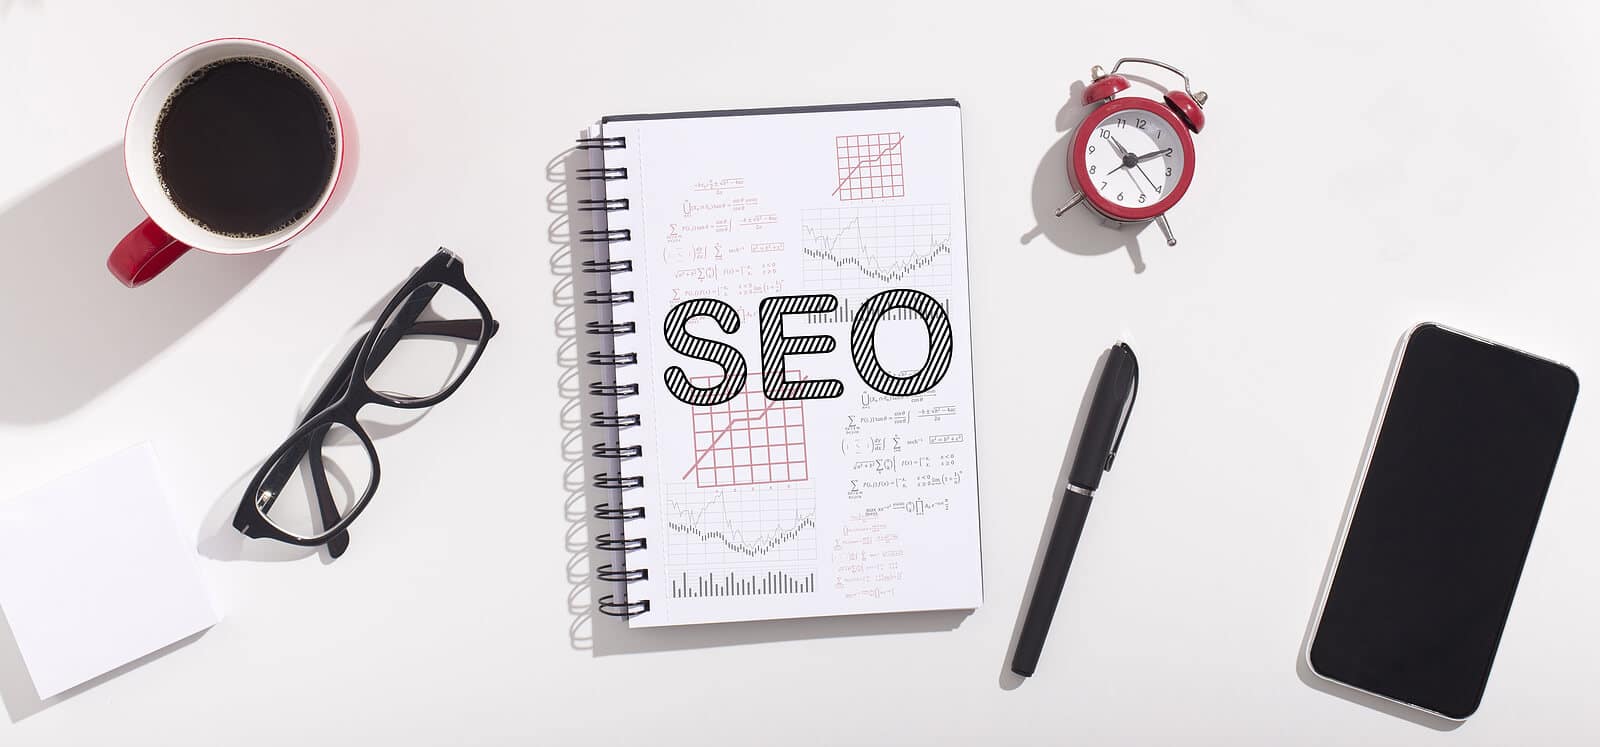 A notebook with SEO written on it on a table. Want to learn how SEO for group therapy practices can push your practice to success? Speak with our team to figure out SEO keywords for therapists to help you!